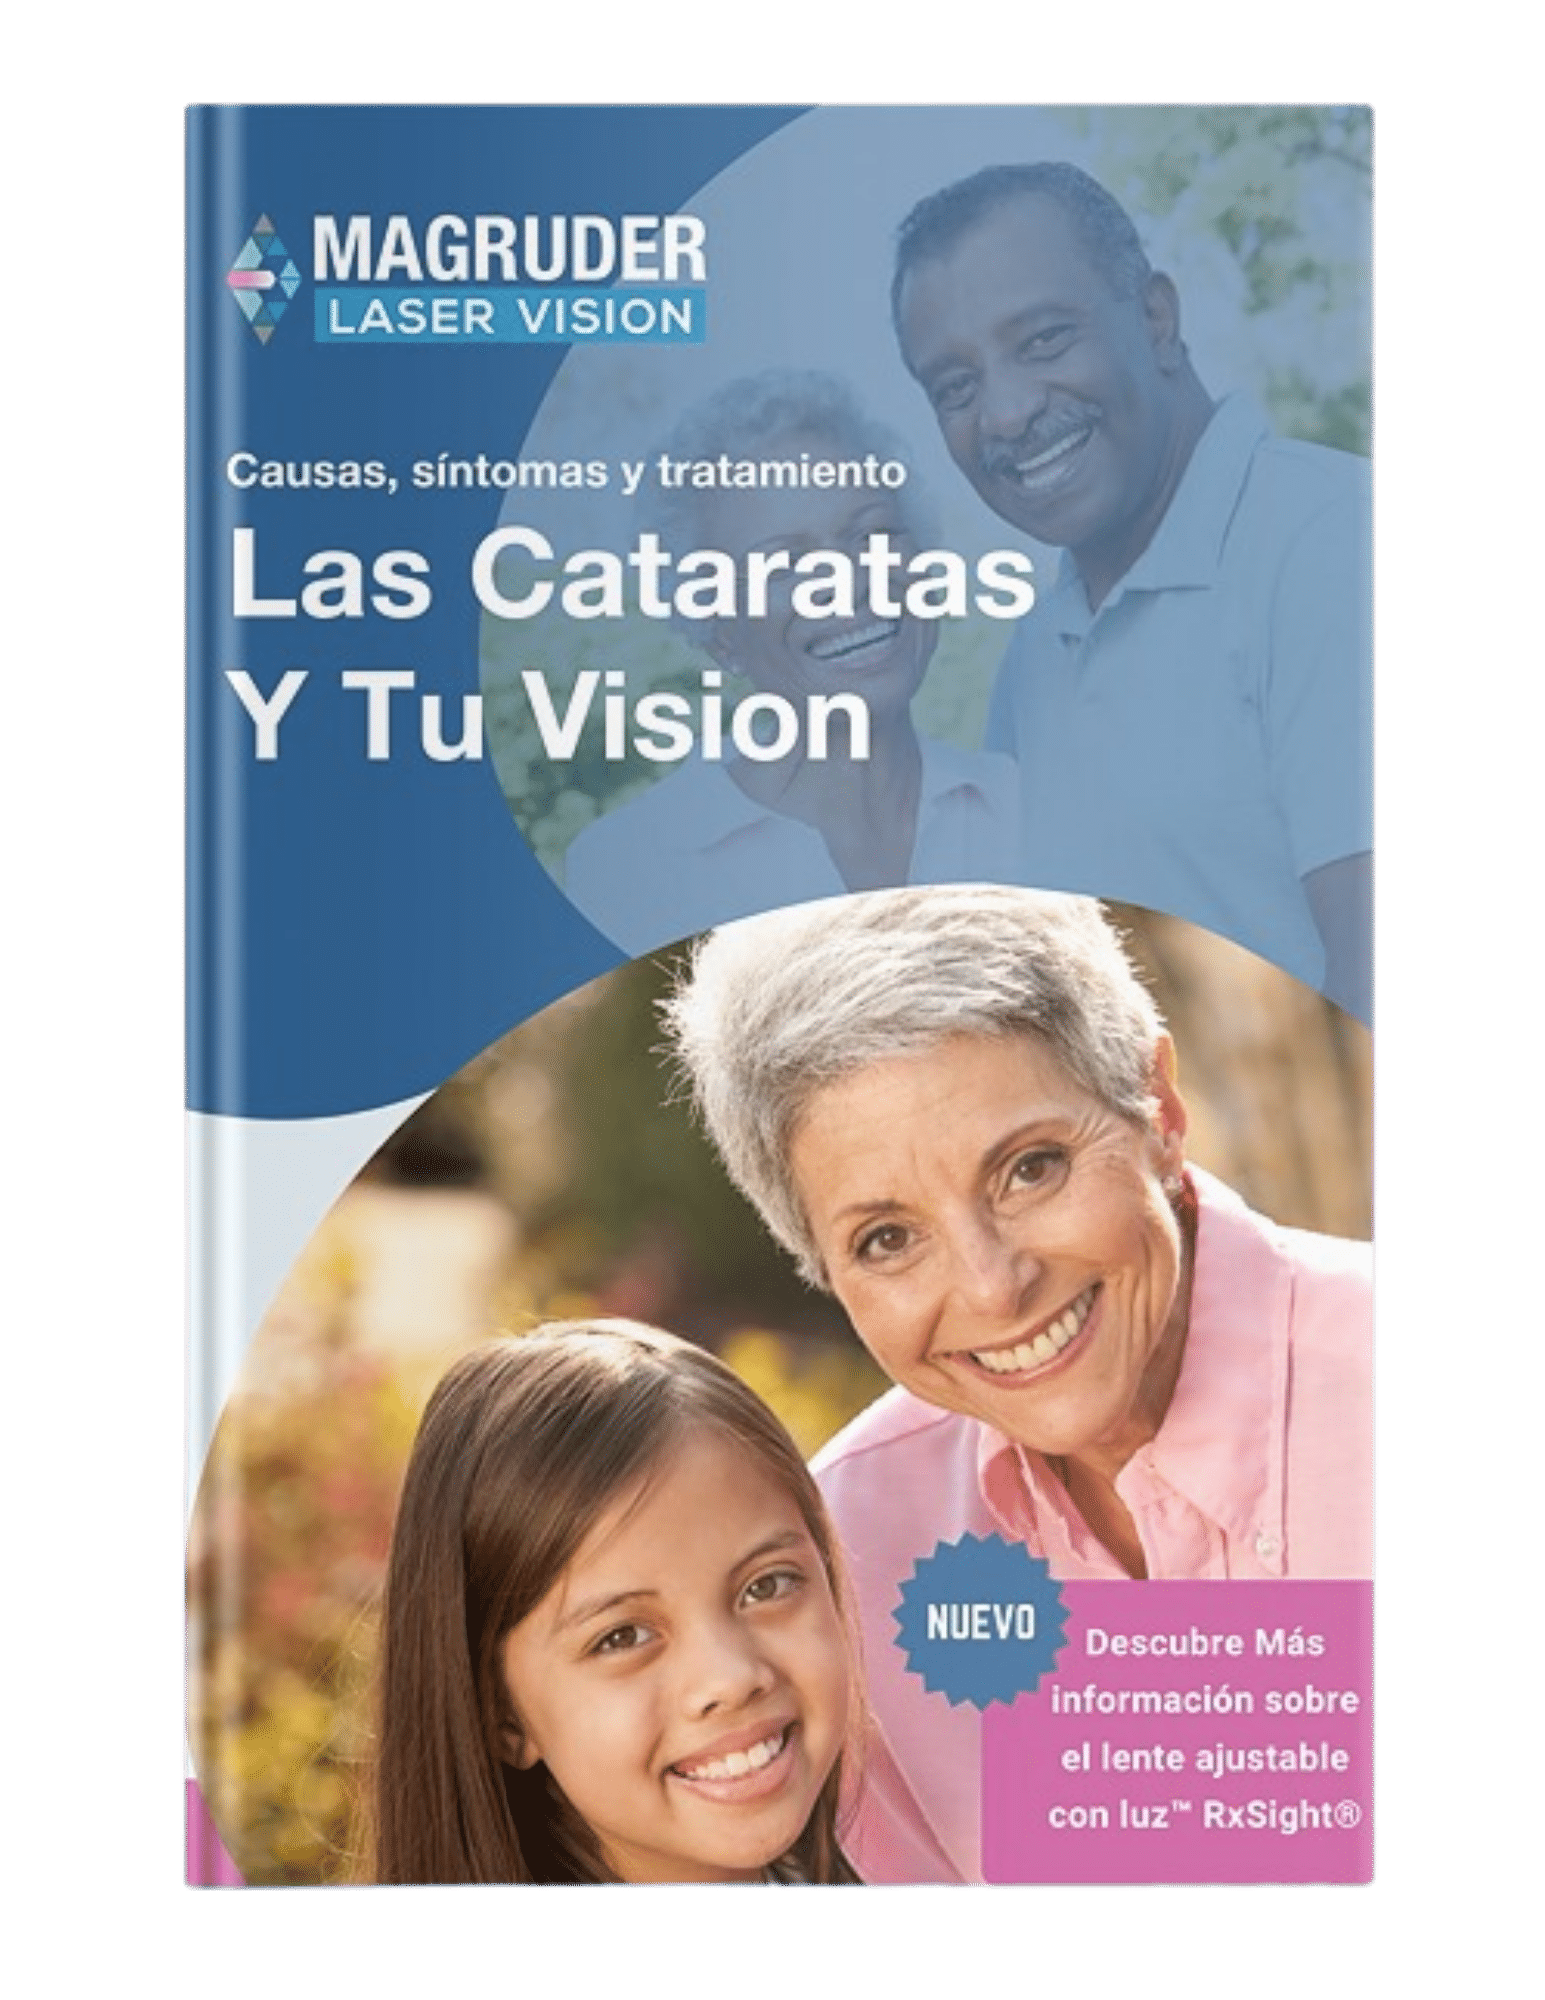 Cataracts Guide in Spanish from Magruder Laser Vision